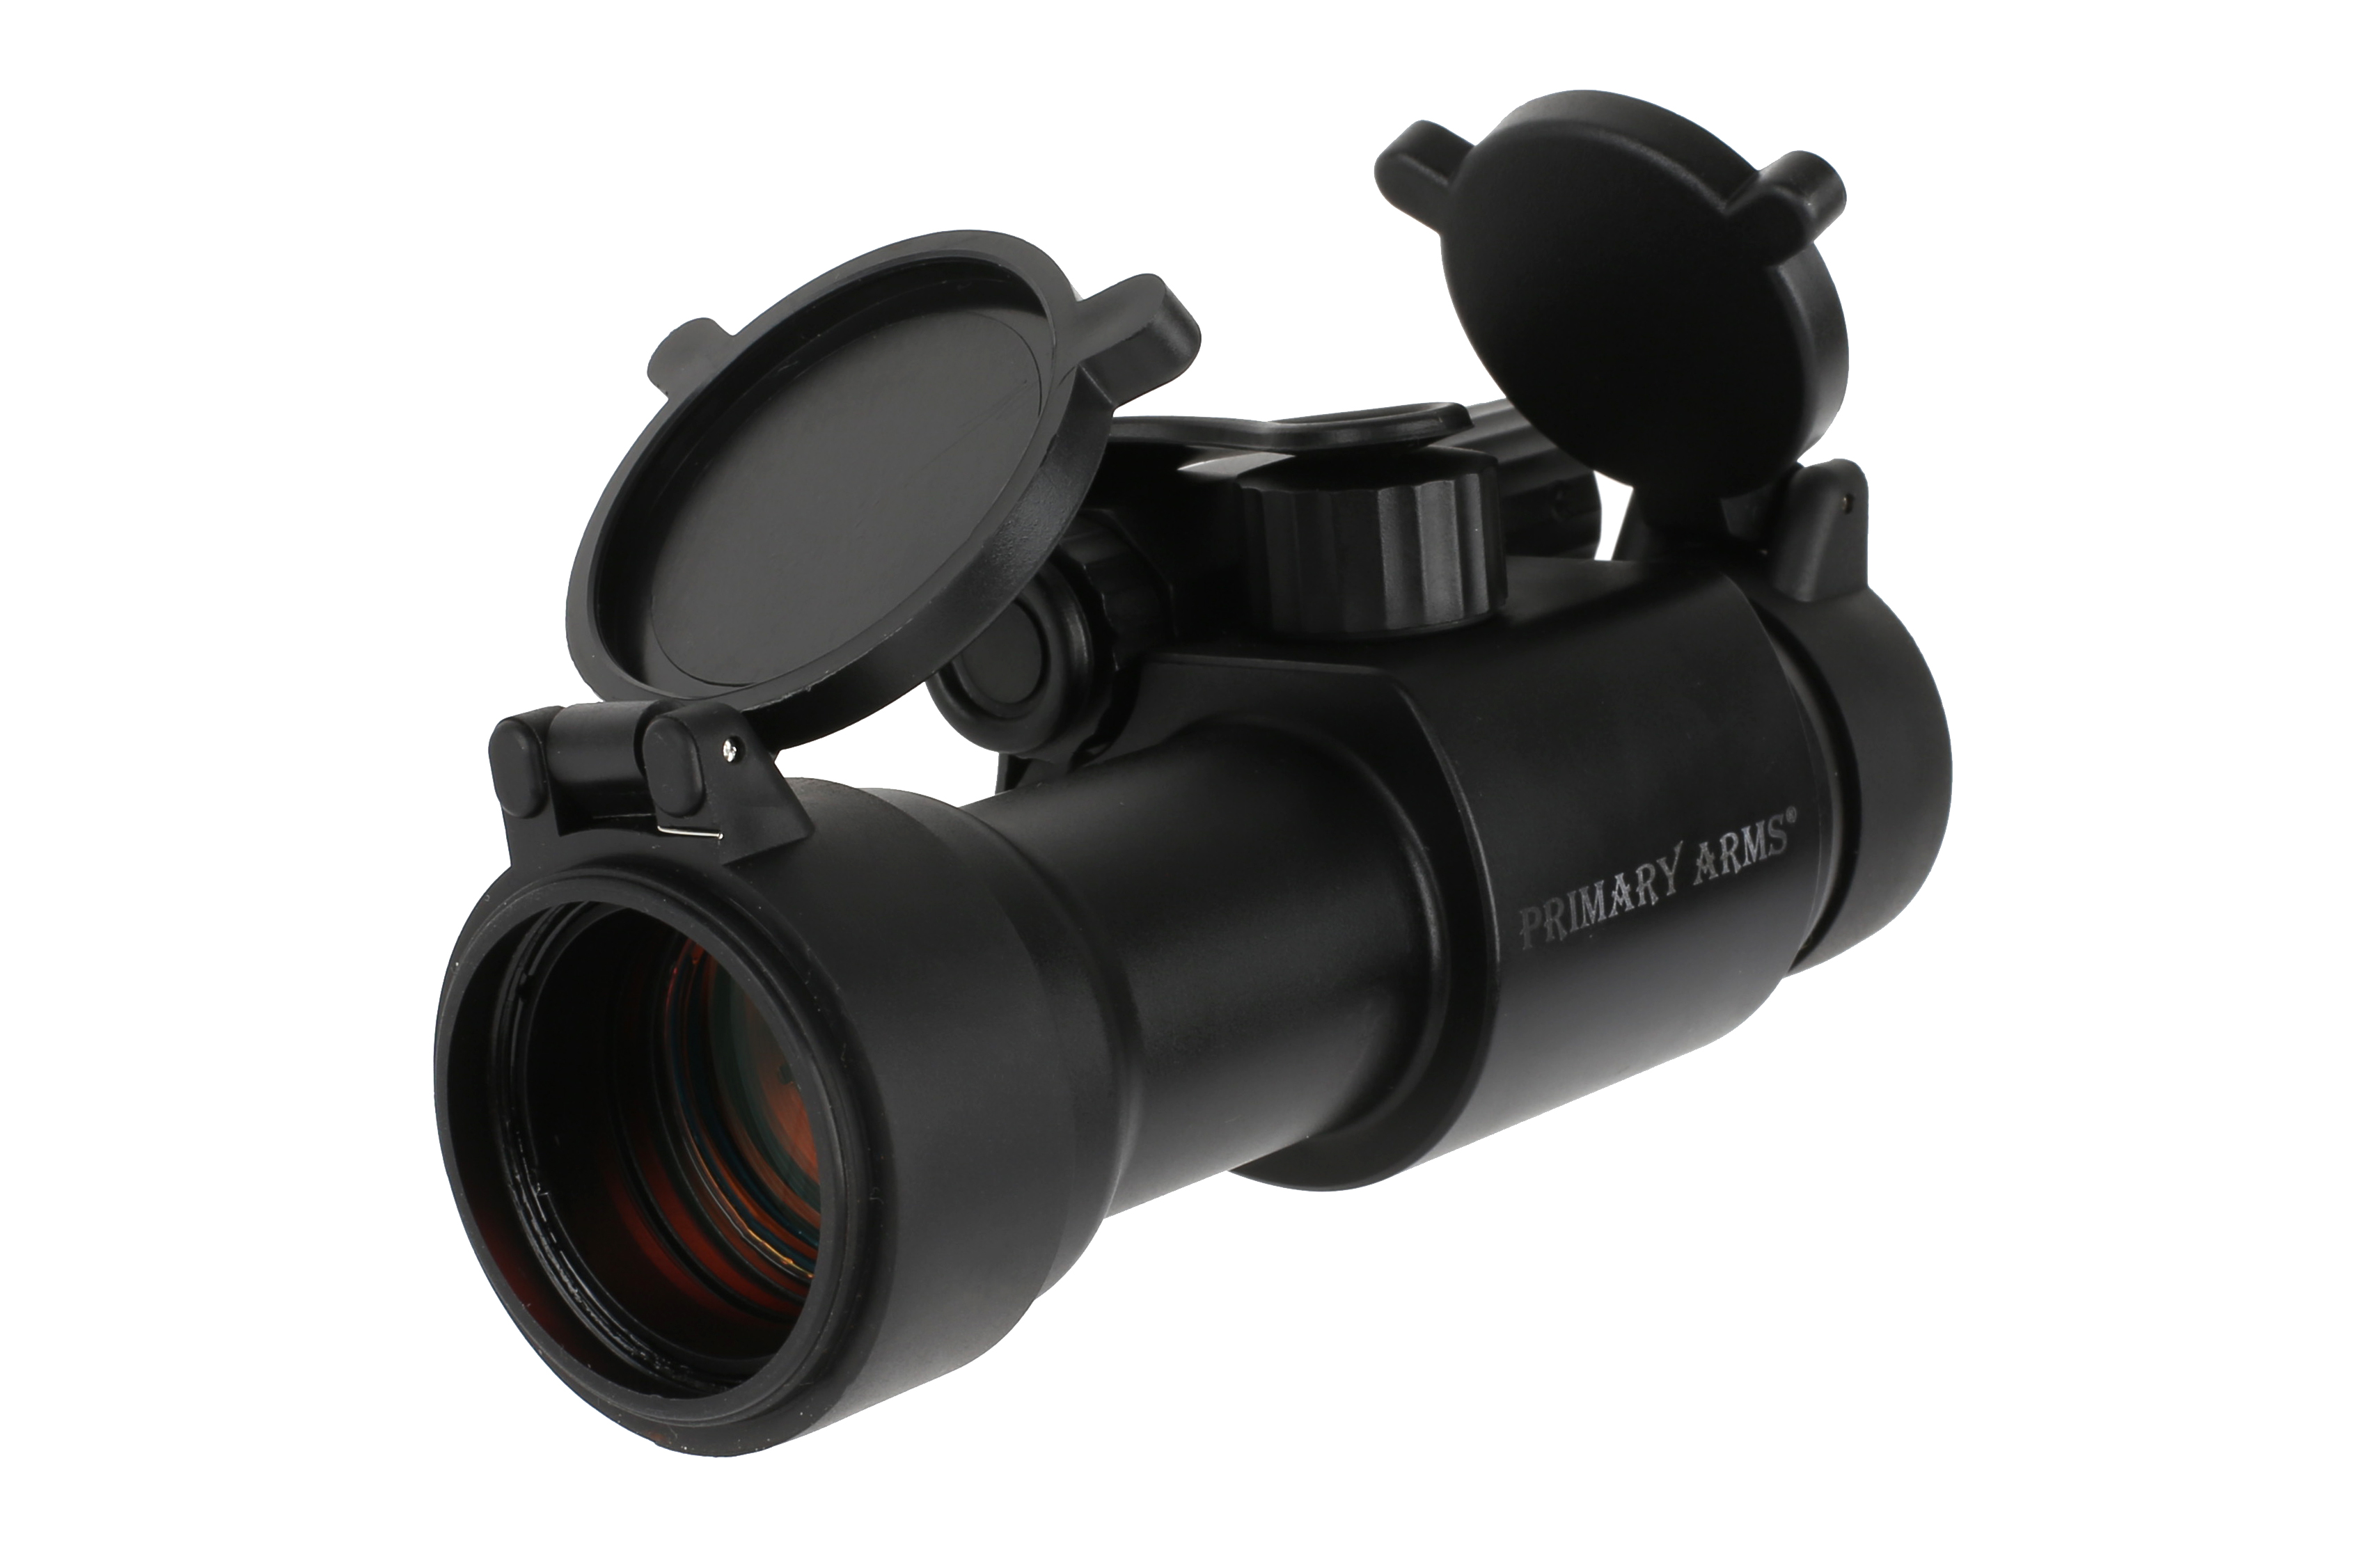 Primary Arms SLx Series Red Dot Sight 30mm Tube, 2 - 1 out of 2 models